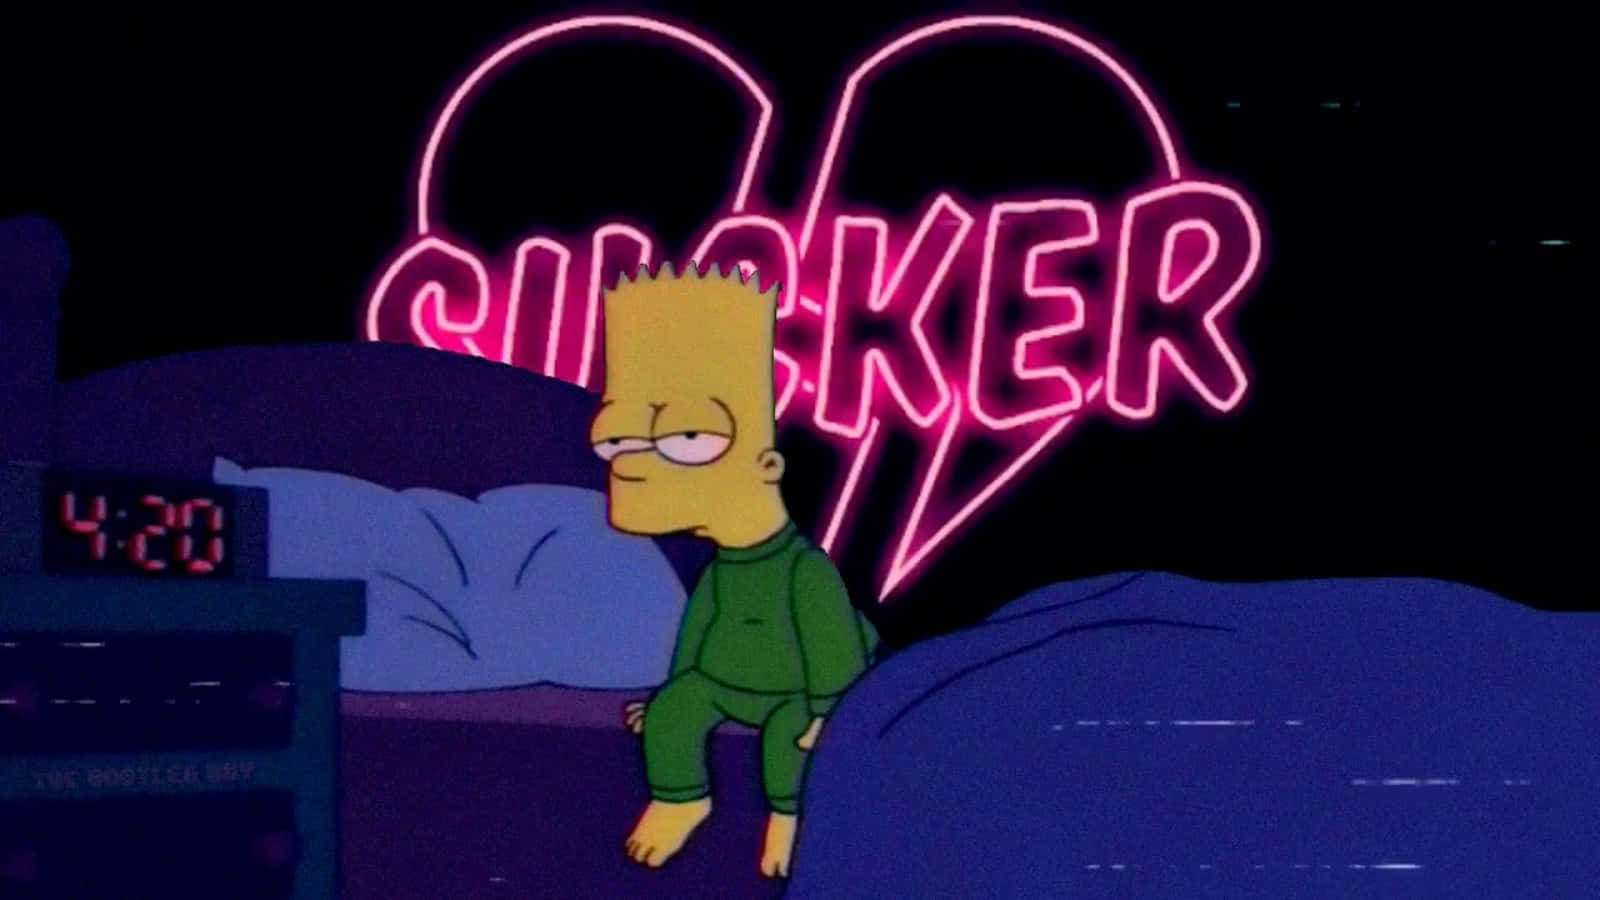 The Simpsons Character Is Sitting In Bed With A Neon Sign